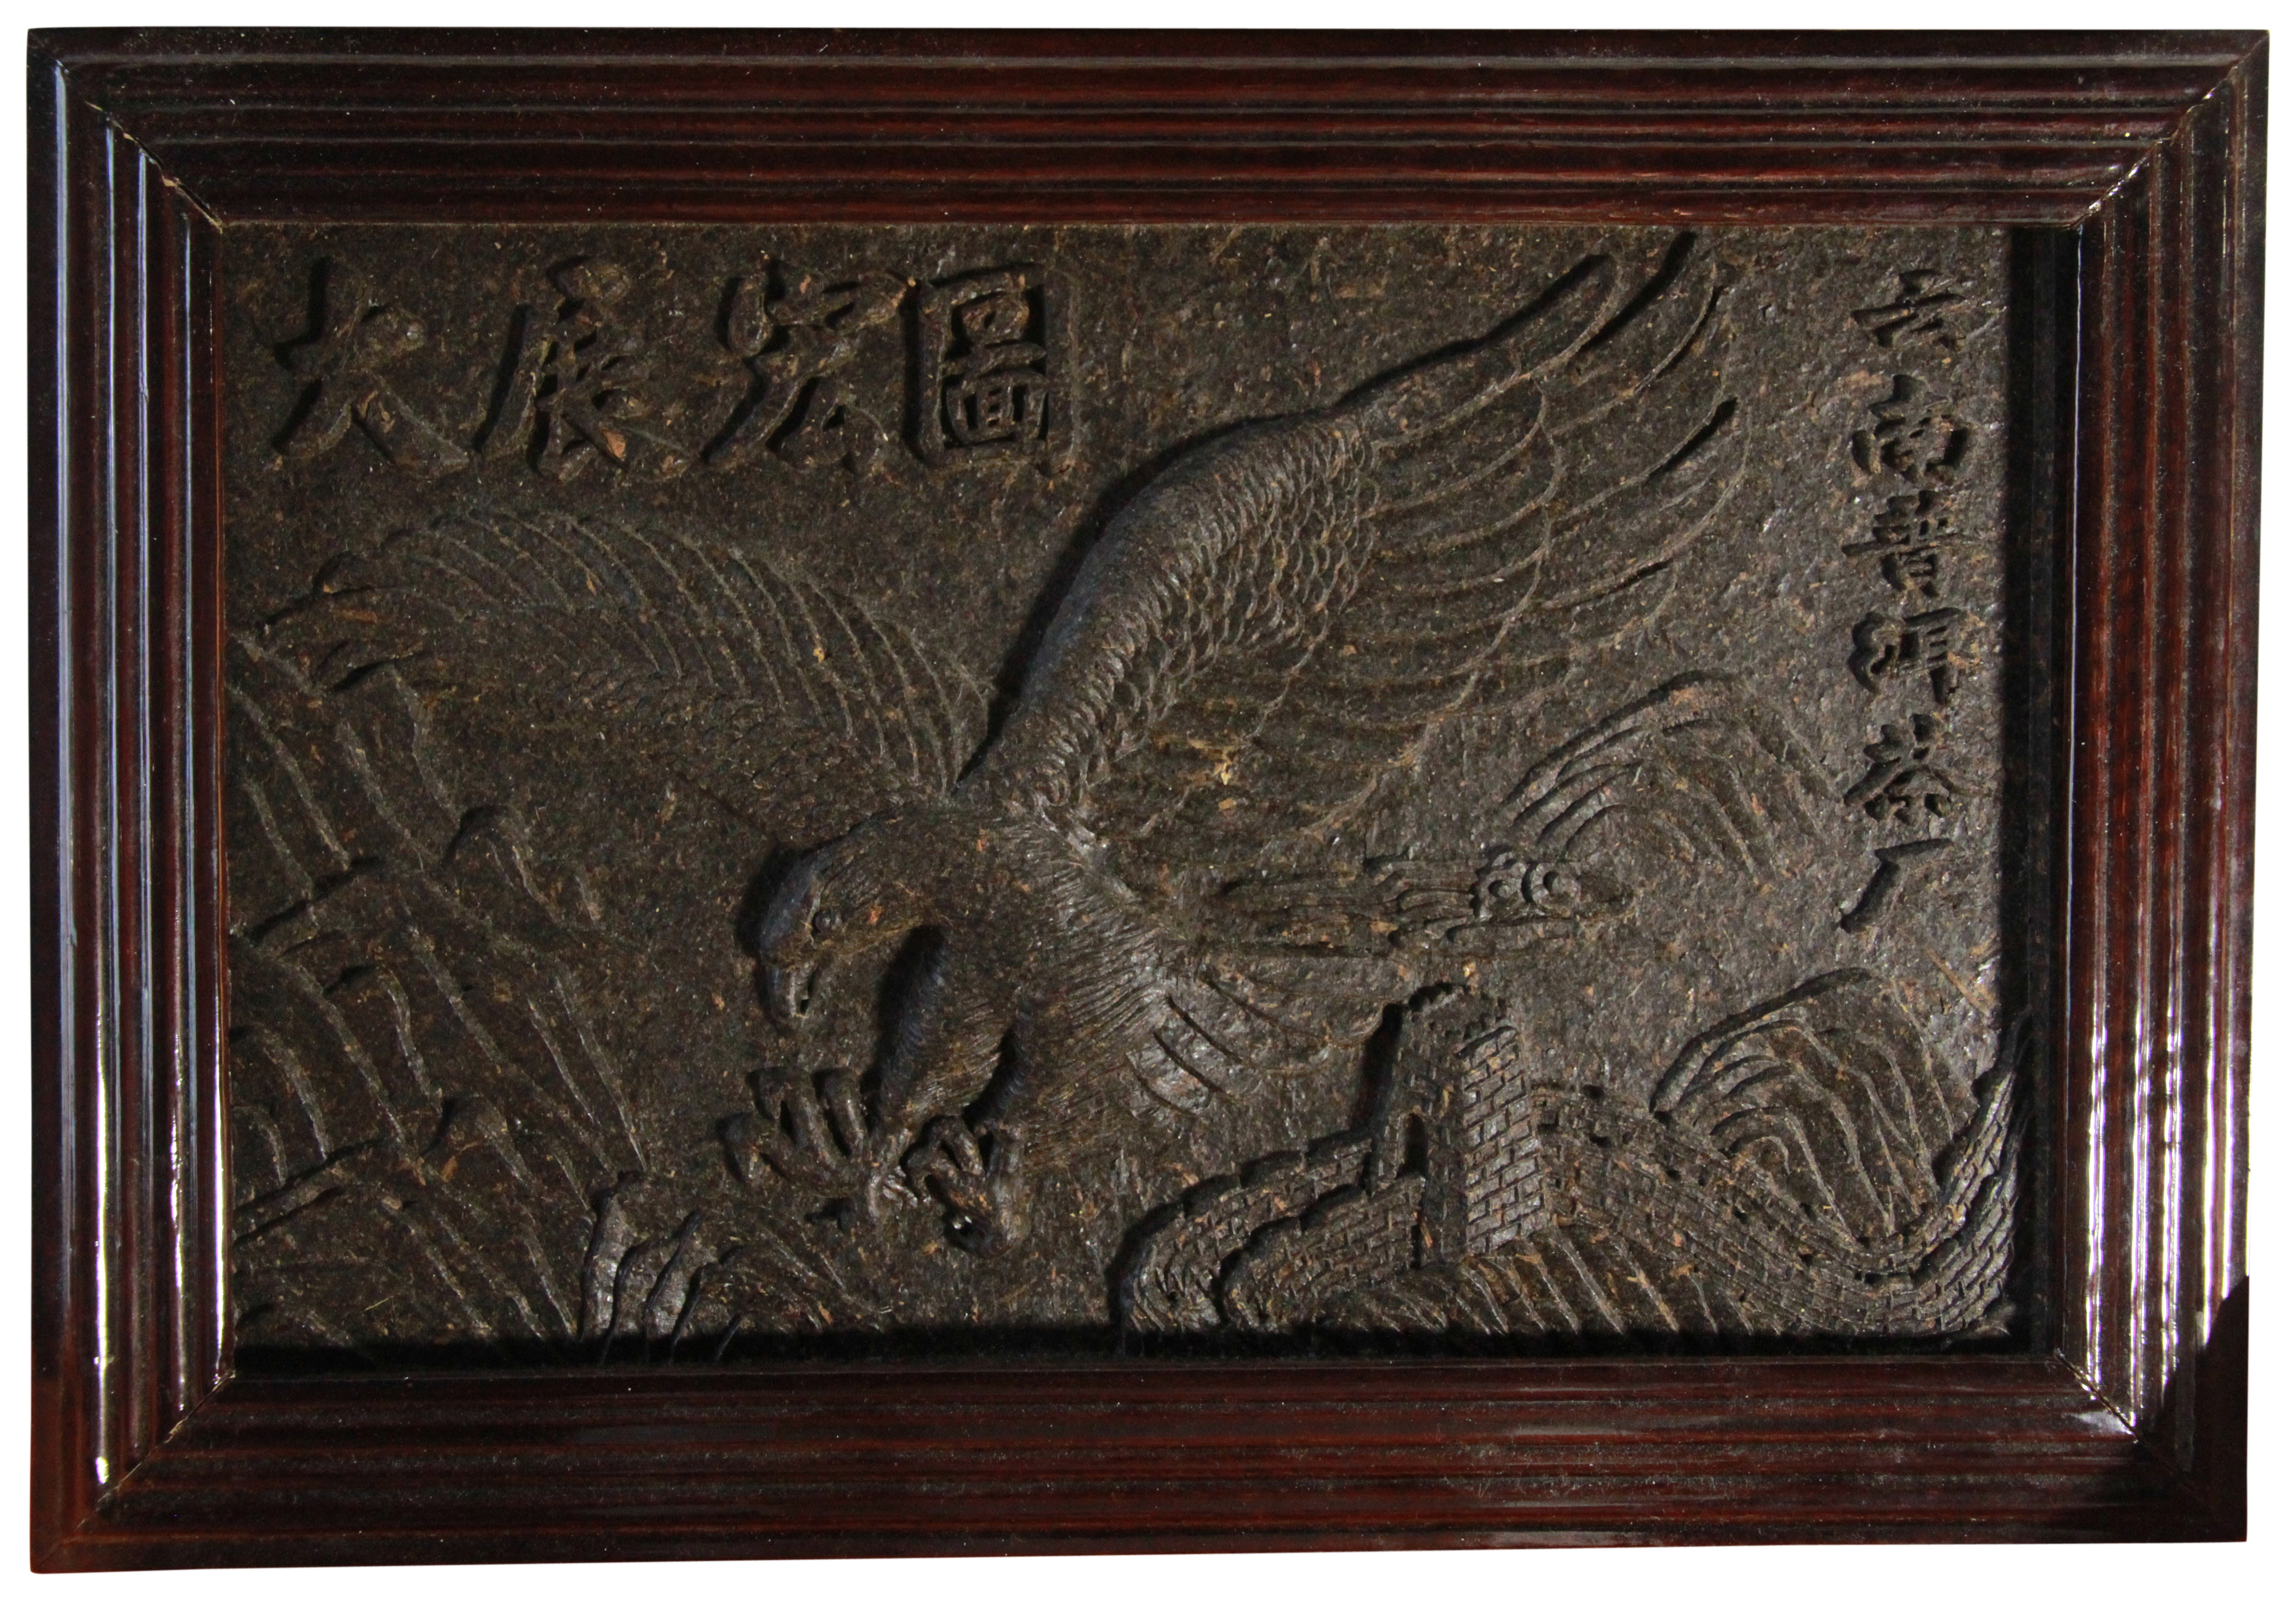 An unusual Chinese boxed tea plaque Yunnan Puer Tea, depicting an eagle & Great Wall China, (L: 37